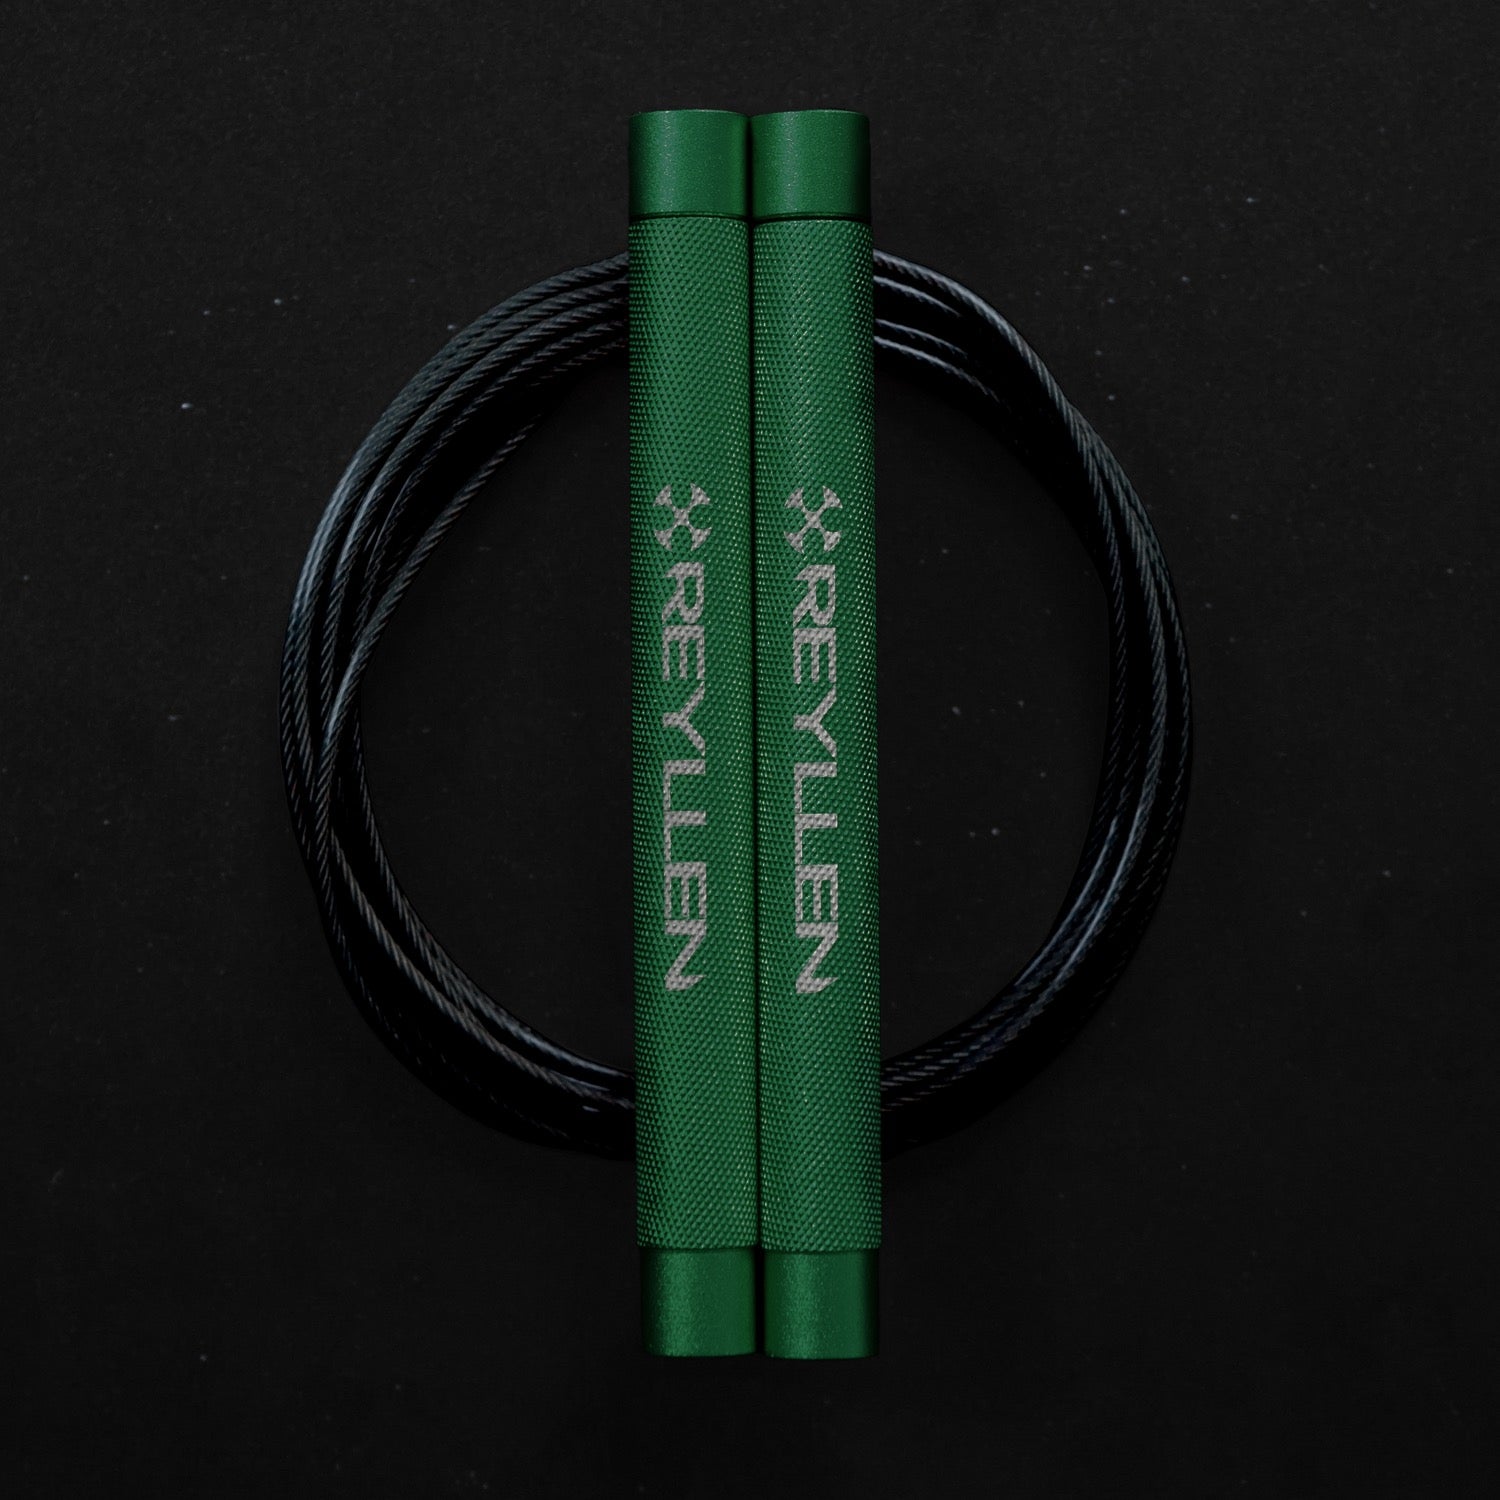 Reyllen Flare Mx Speed Skipping Jump Rope - Aluminium Handles - green with black pvc coated cable